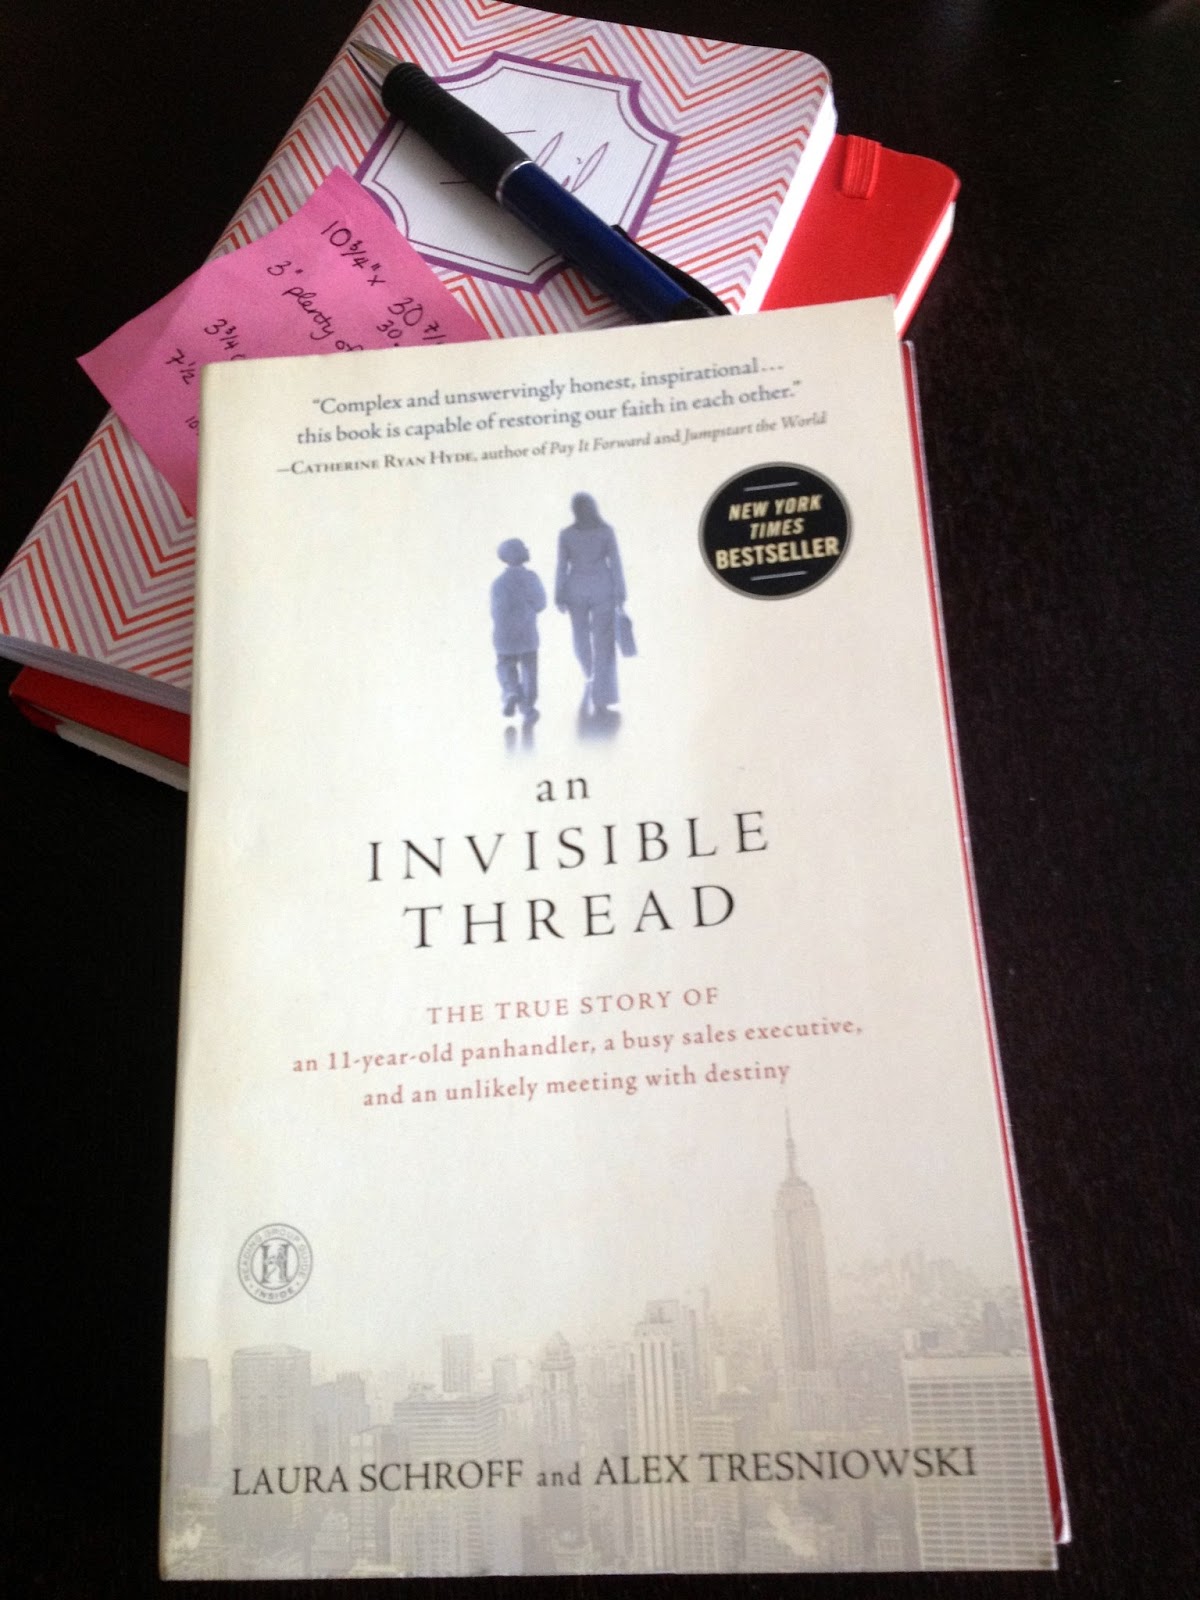 In Transition: An Invisible Thread